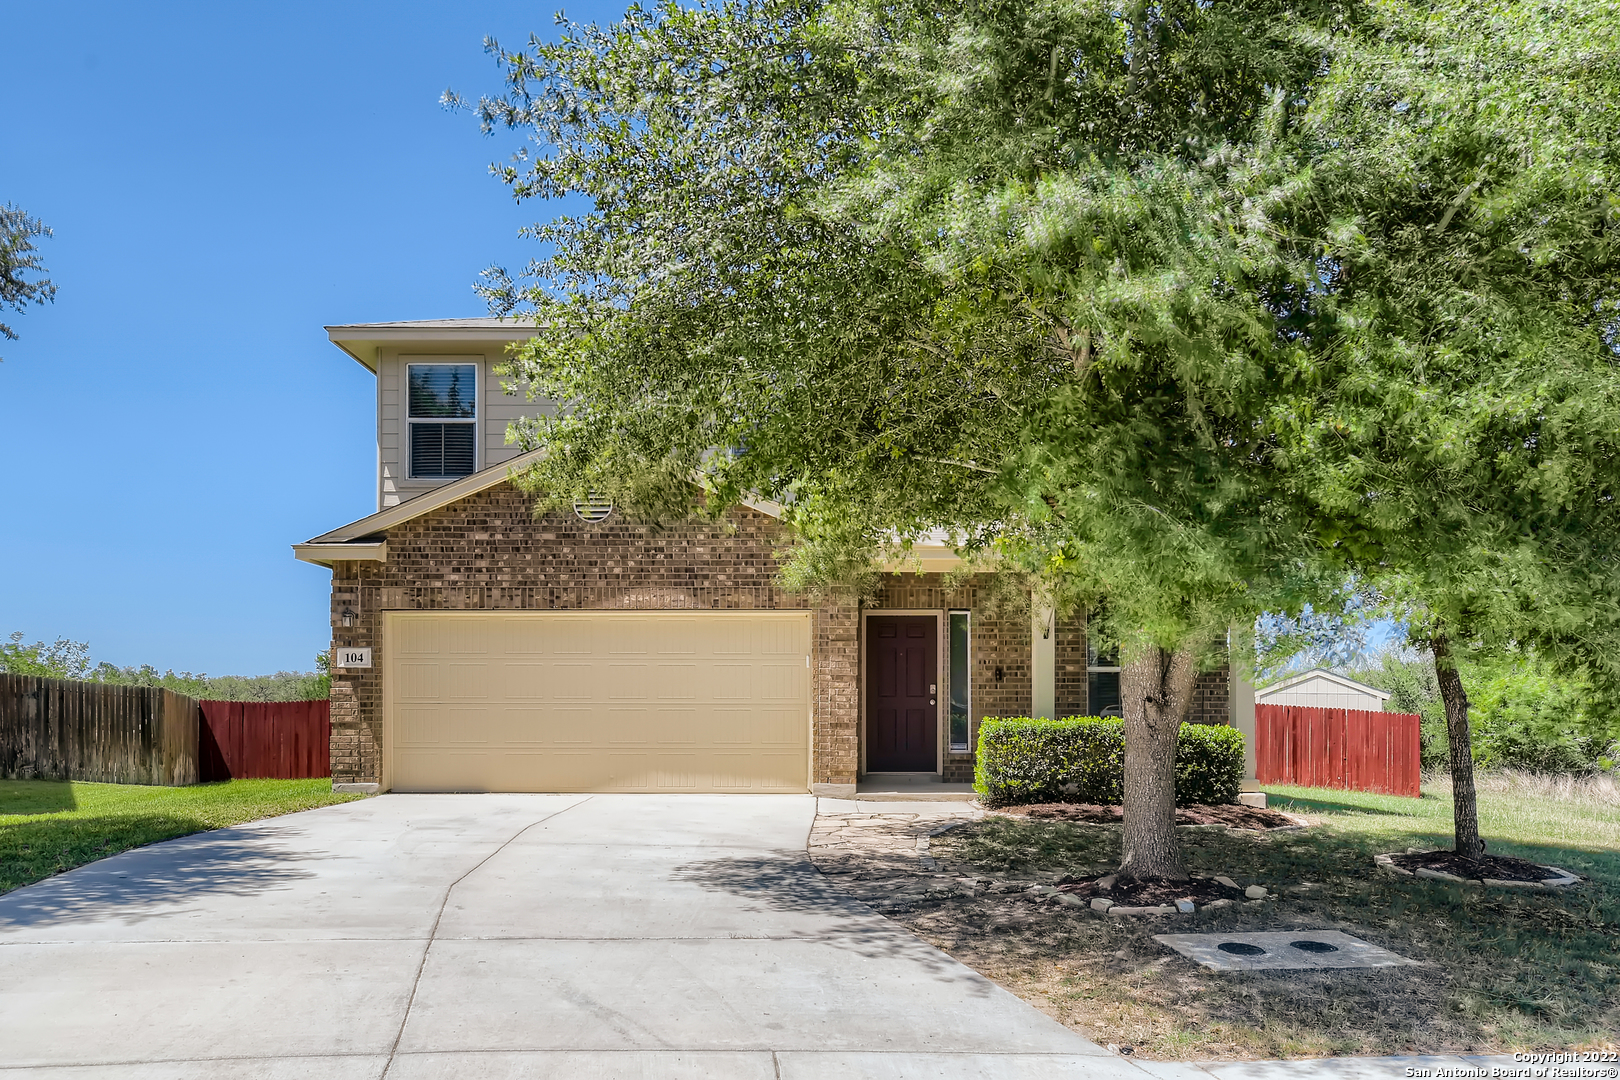 Rare find! Spacious,4 Bed, 3.5 Bath (Dual Master), Home on a Greenbelt lot & Nestled at the end of a Large Cul-de-sac in sought after Redbird Ranch! Impressive oversized lot adjacent to a wooded nature trail. Unique, features include D/STRS & Up/Stairs MSTR BR w/full BTH, Whirlpool Tub,  No Carpet, New Paint, New Roof, Electrical Vehicle Charging Station, Gas Cooking, Wsoft, Oversized rooms & closets. Prime location near LAFB, Sea World, easy access to 211 & Potranco, City Corp, Schools, Downtown, & Resort-Style Amenities.